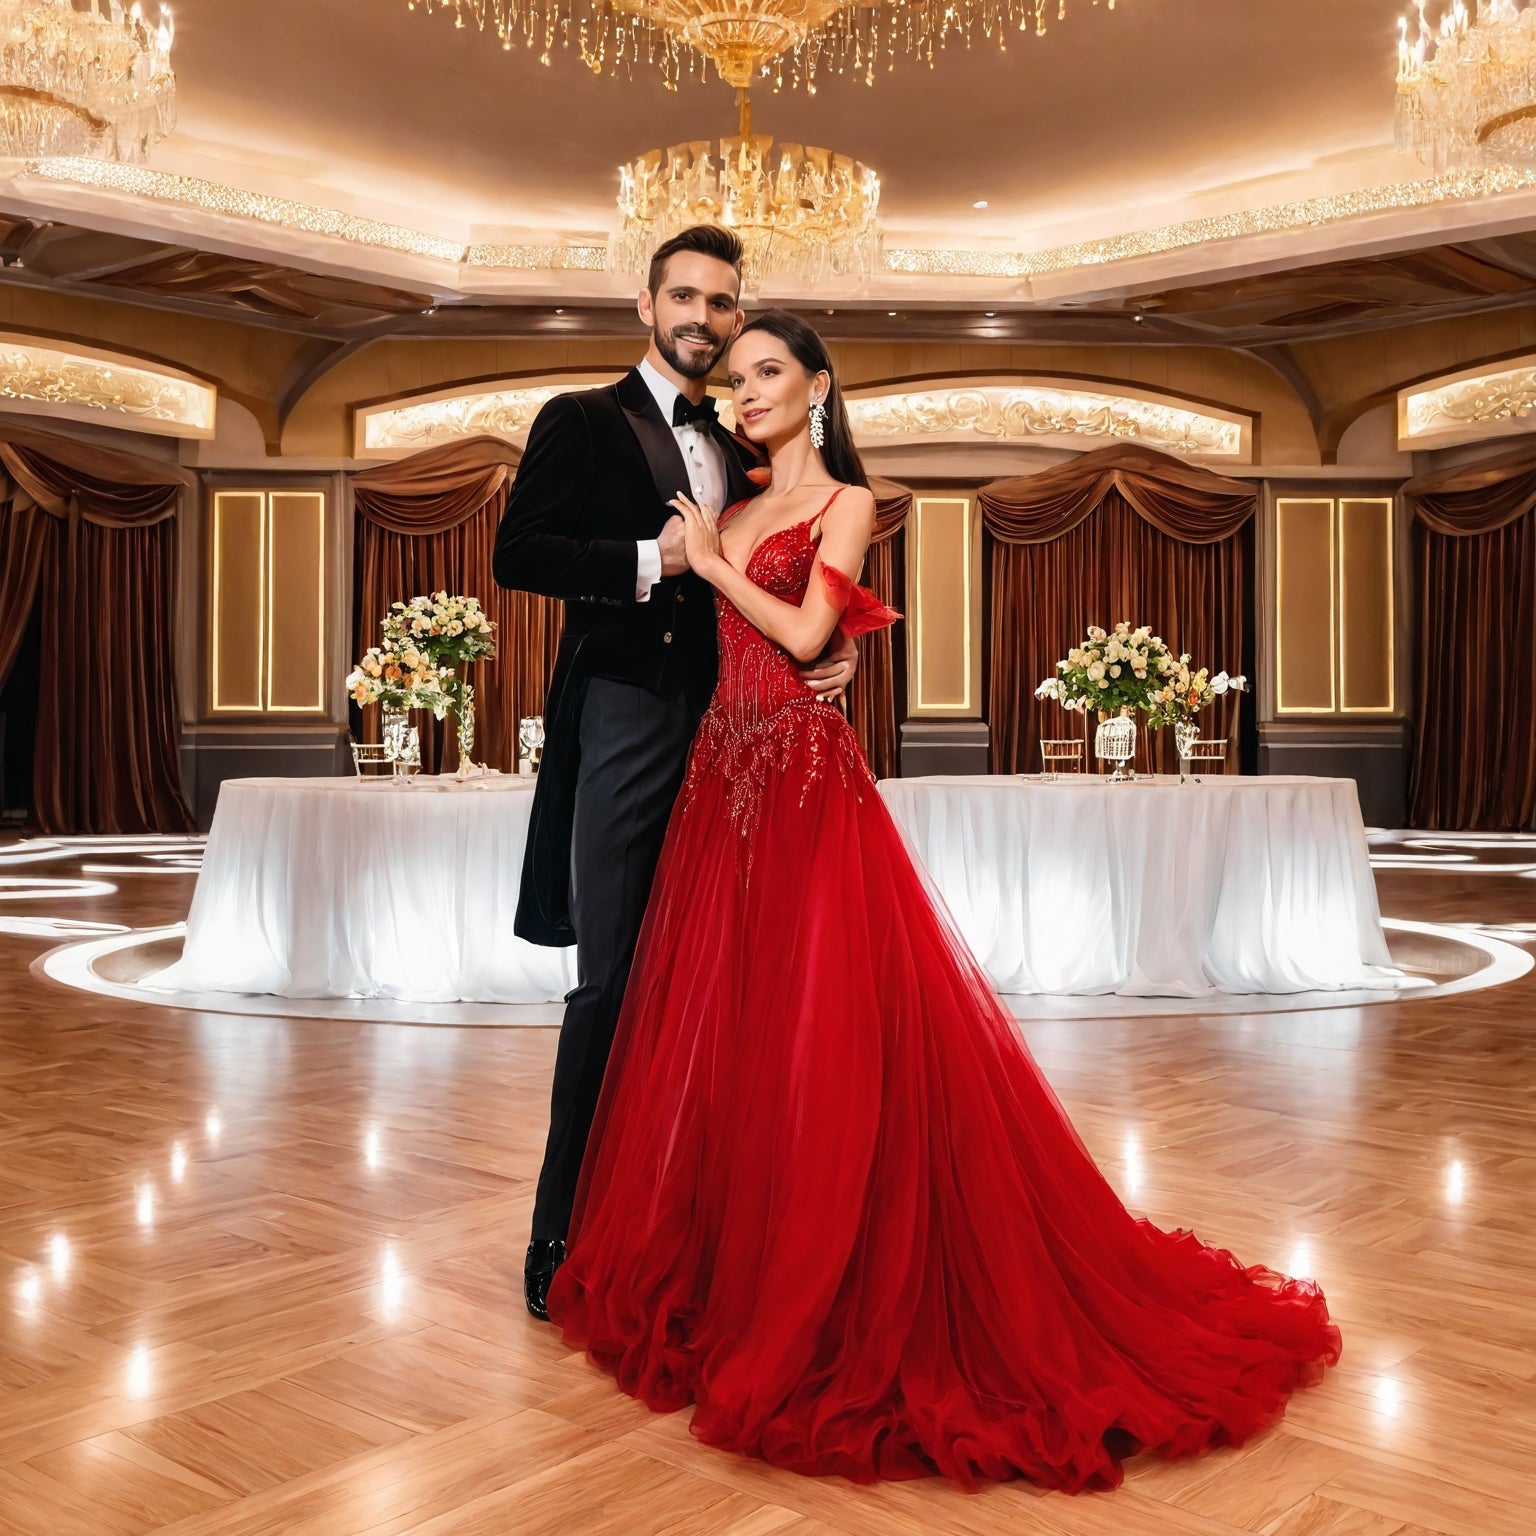 A woman in a red ballroom gown and a man in a black tux dancing in a ballroom